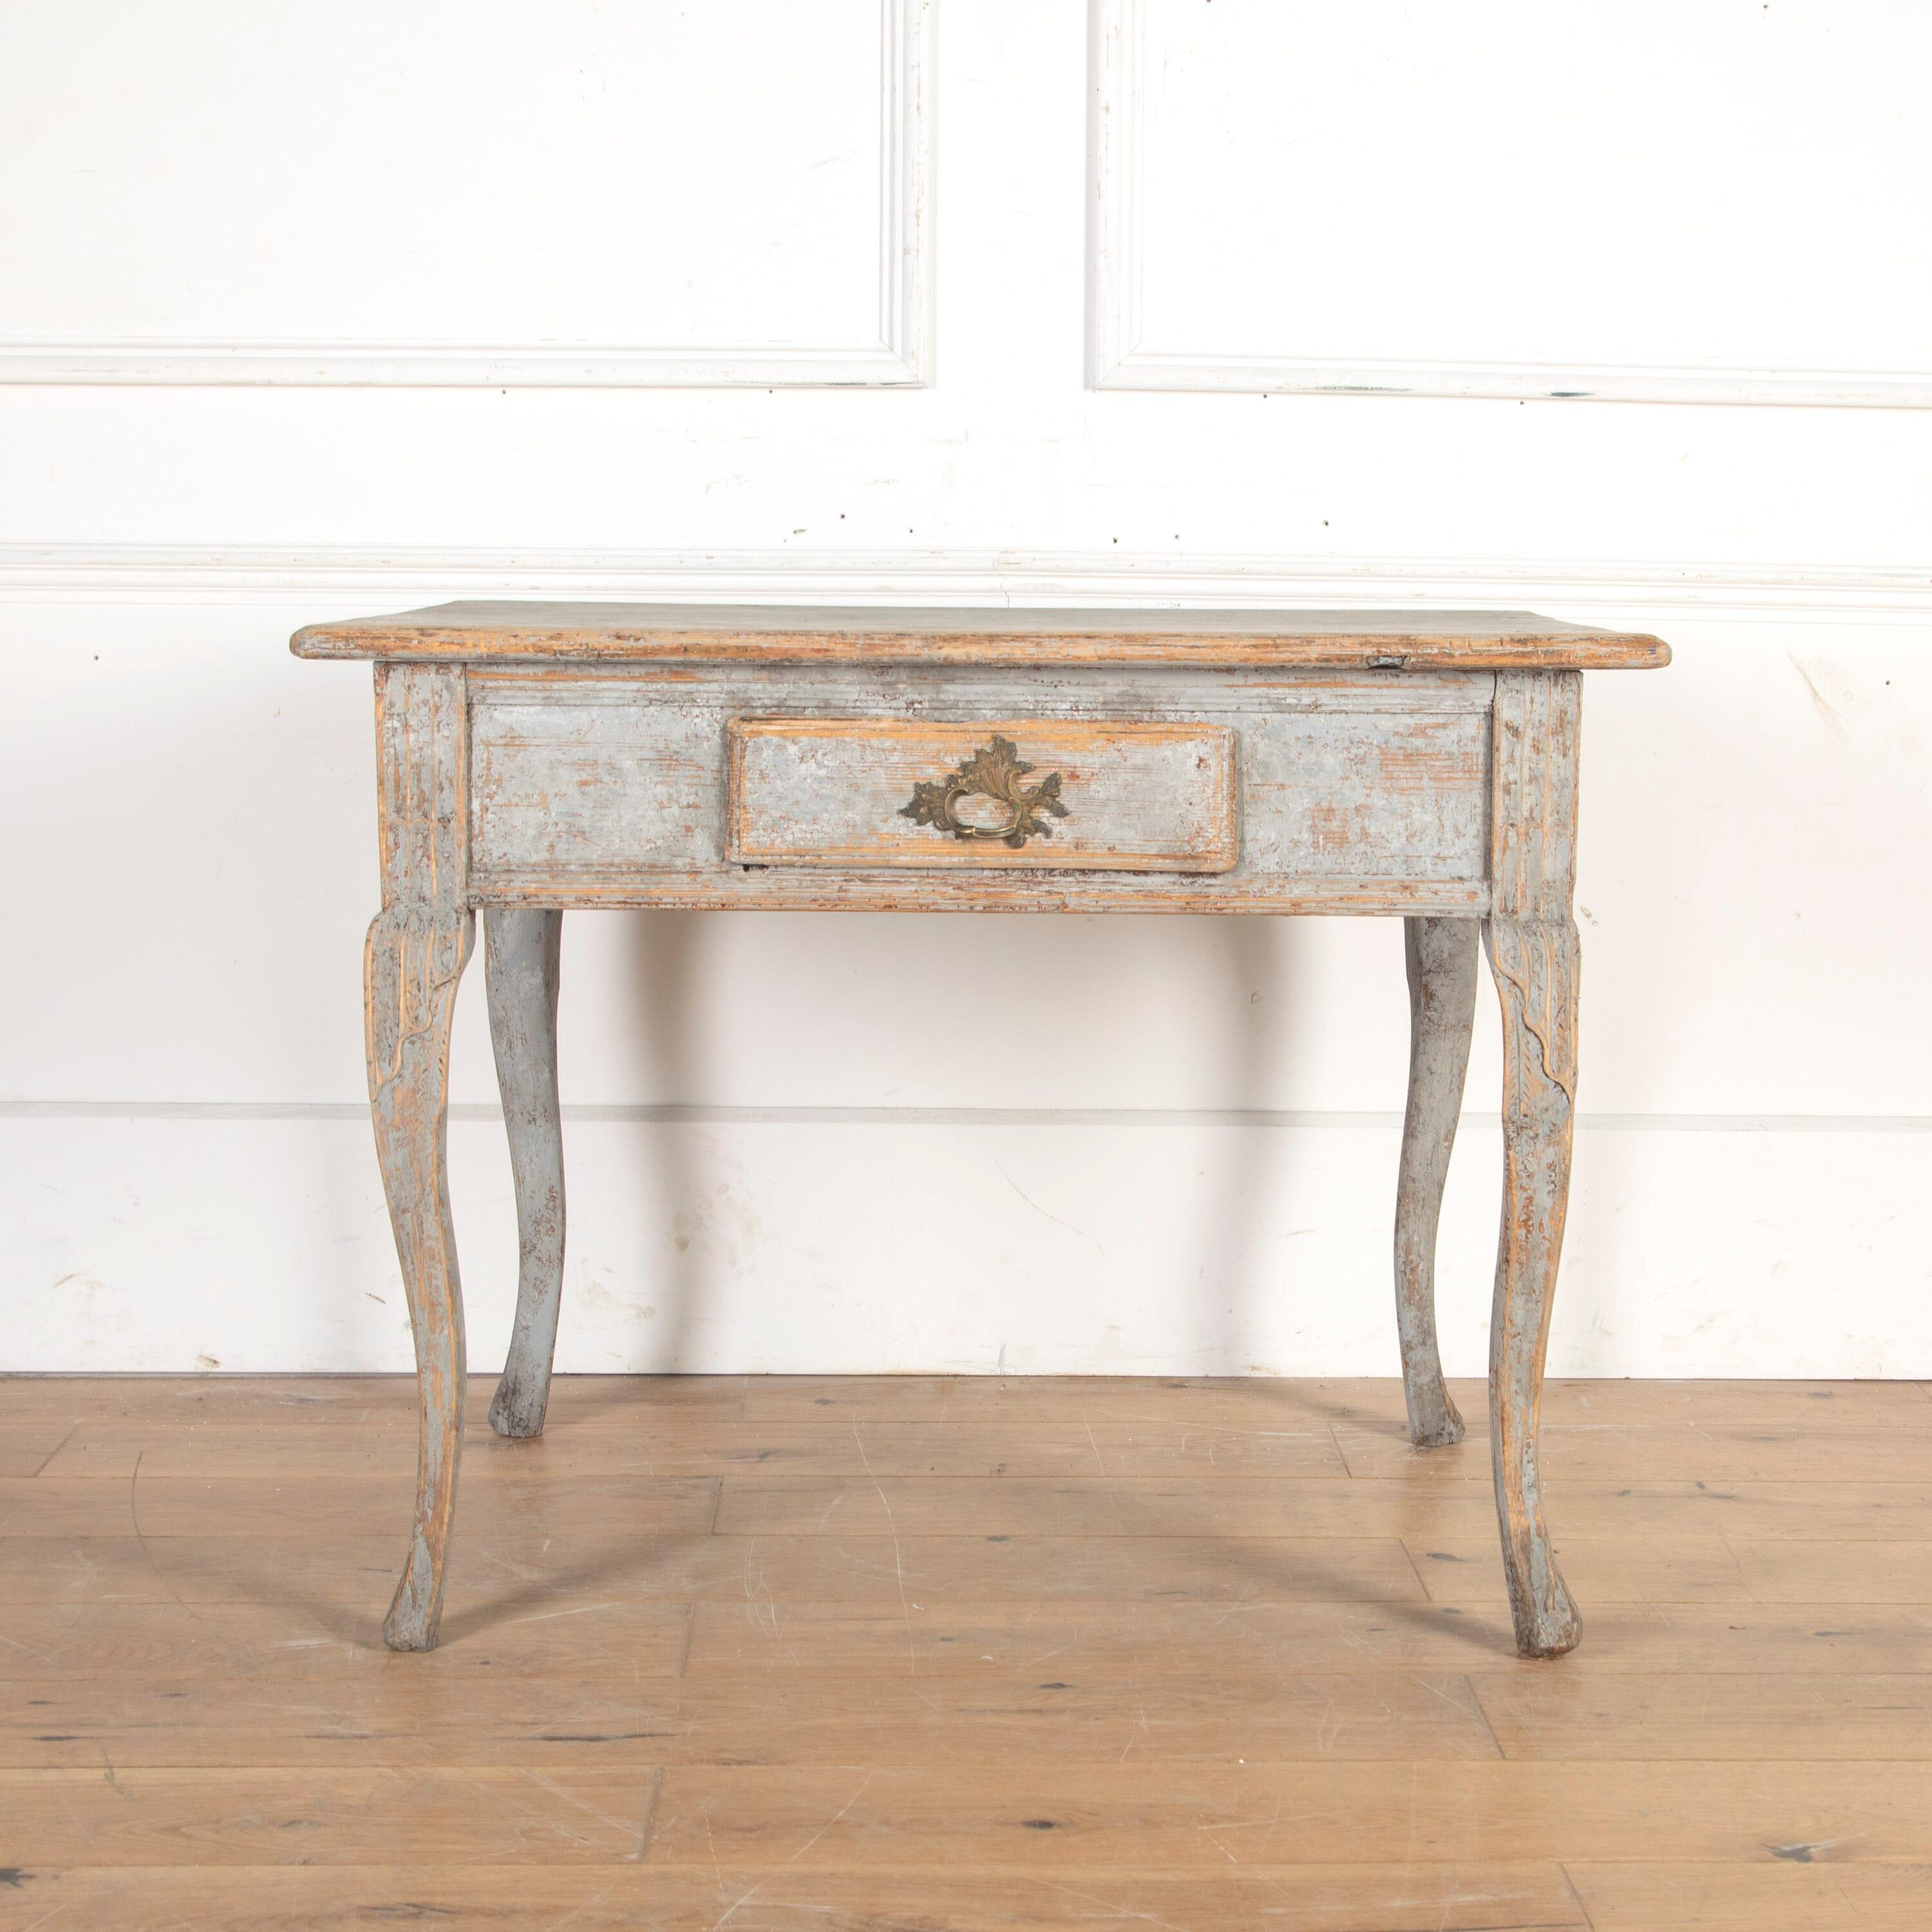 Swedish 18th Century provincial side table in the rococo style.

This elegant table has charming small proportions and offers a single drawer to the frieze. It is supported on graceful cabriole legs. 

It has later distressed blue paint and a